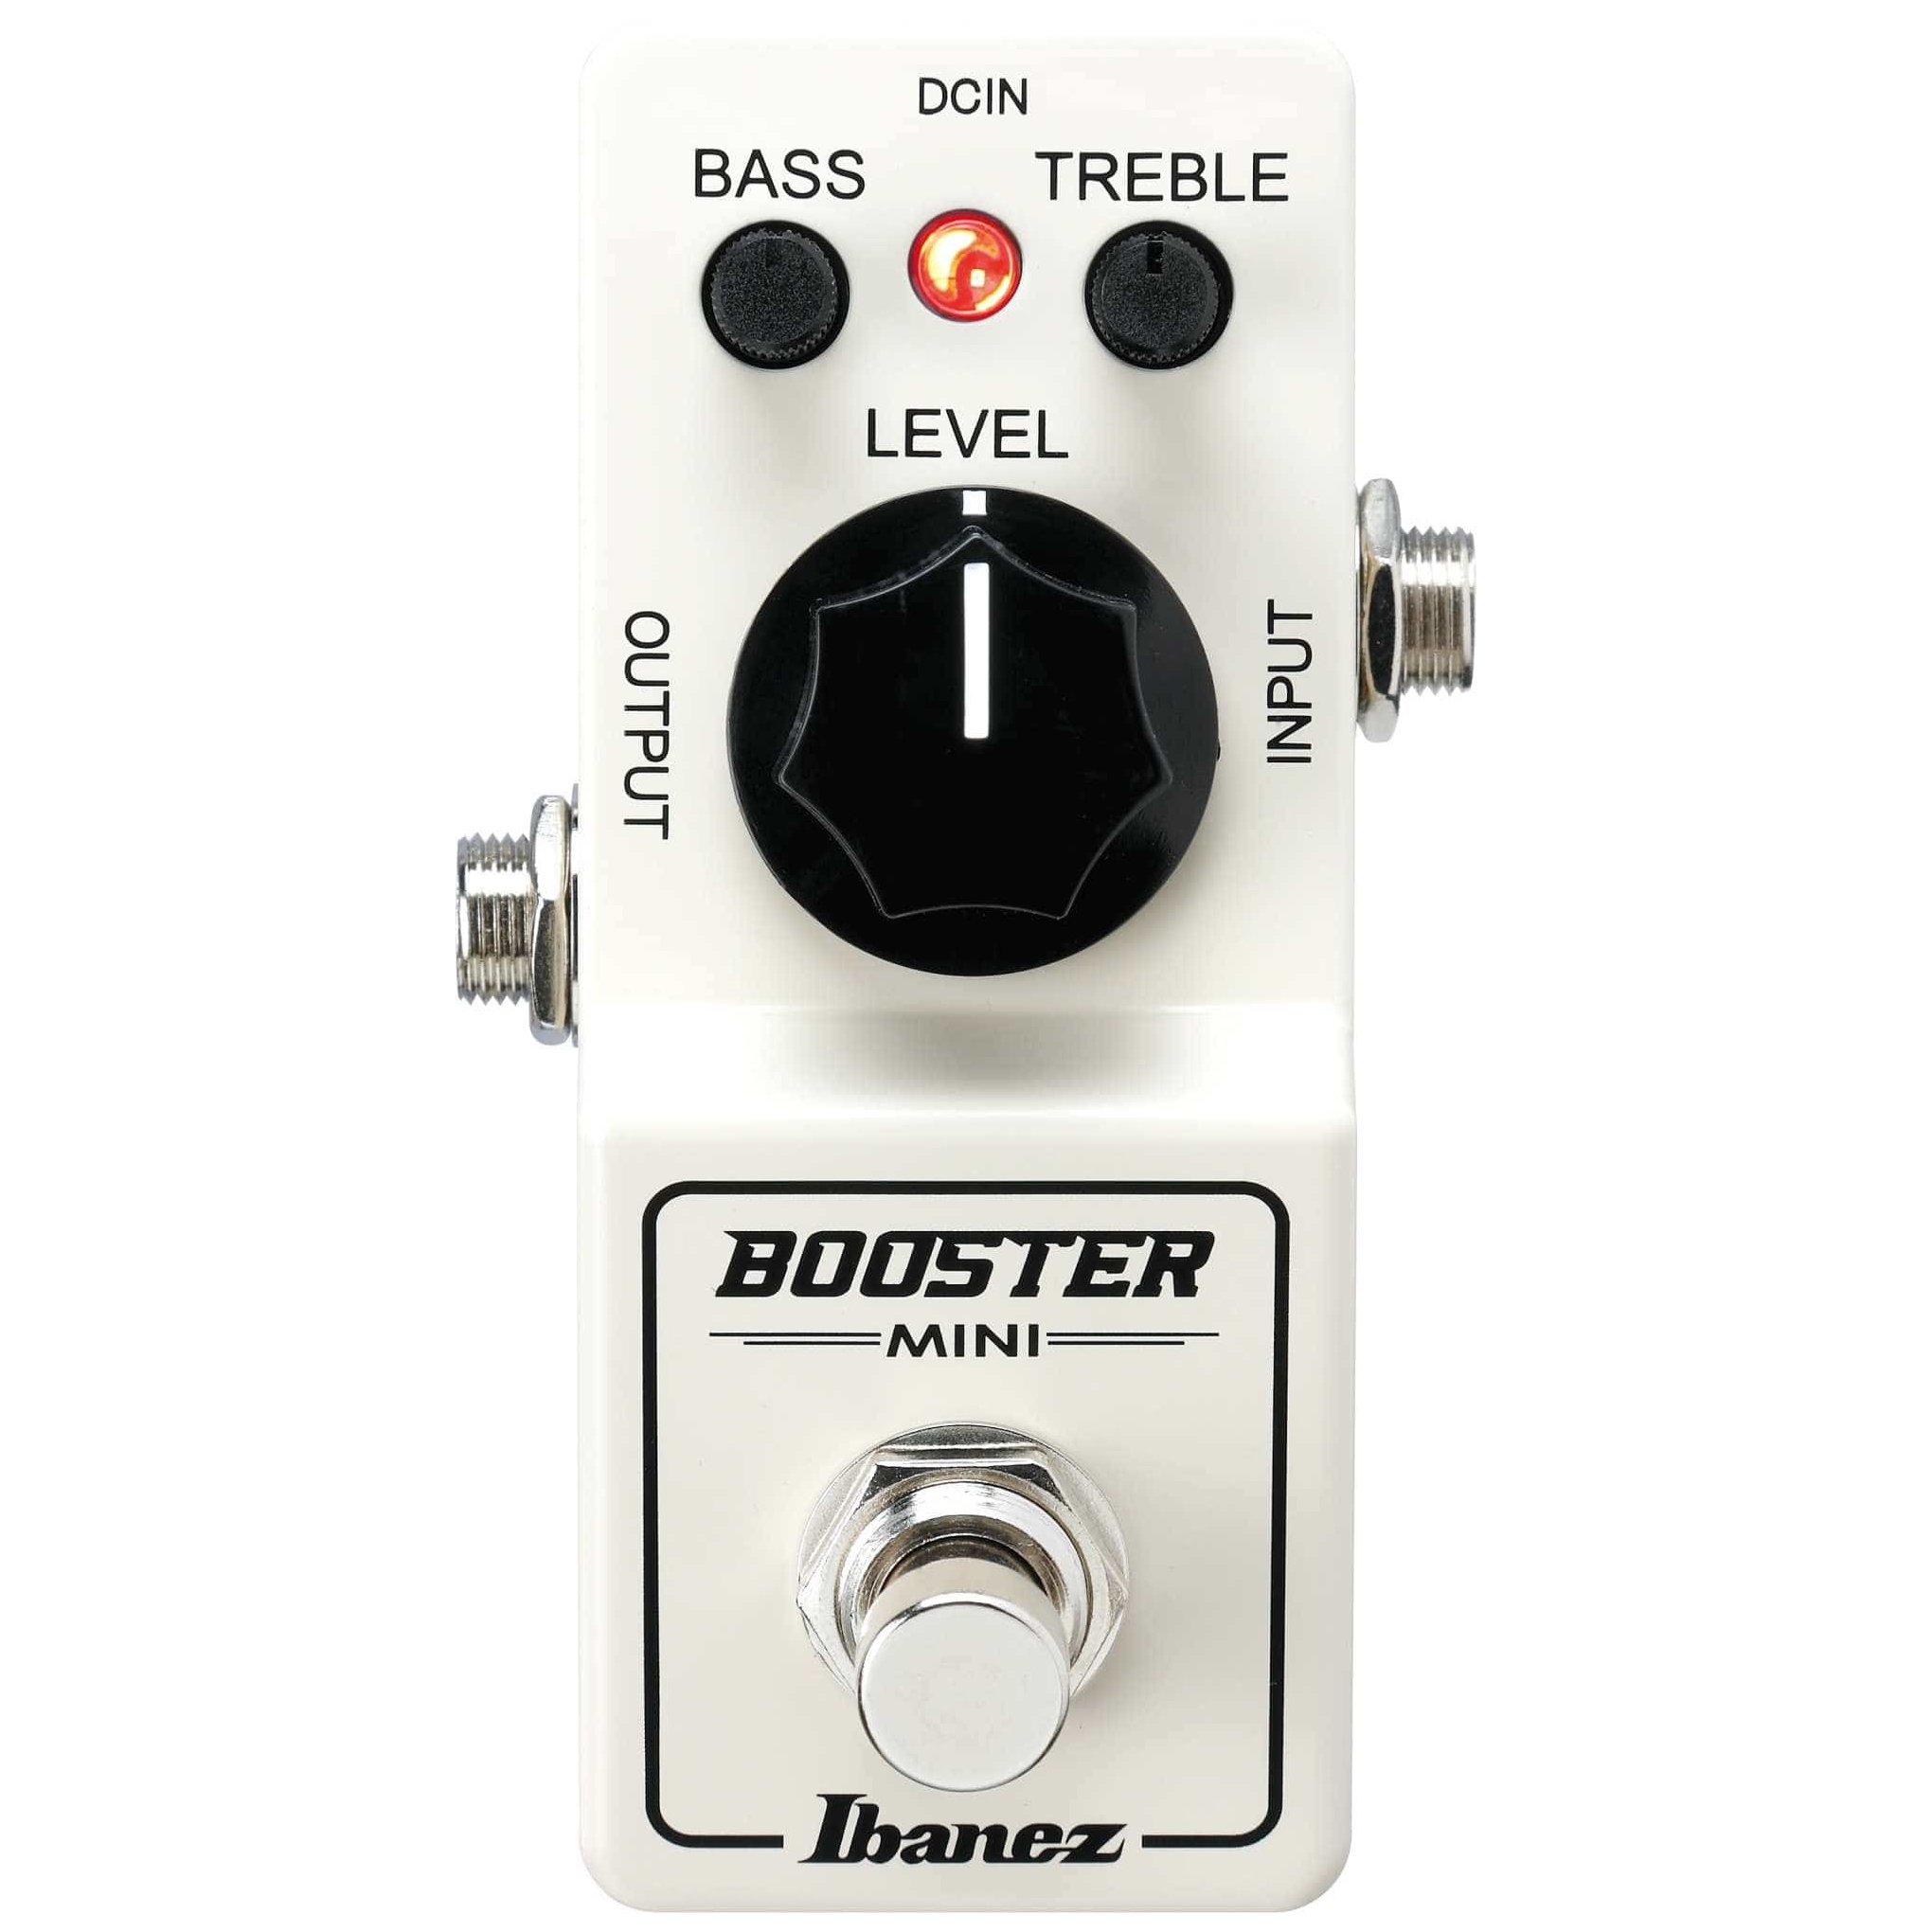 Ibanez Booster Mini Pedal